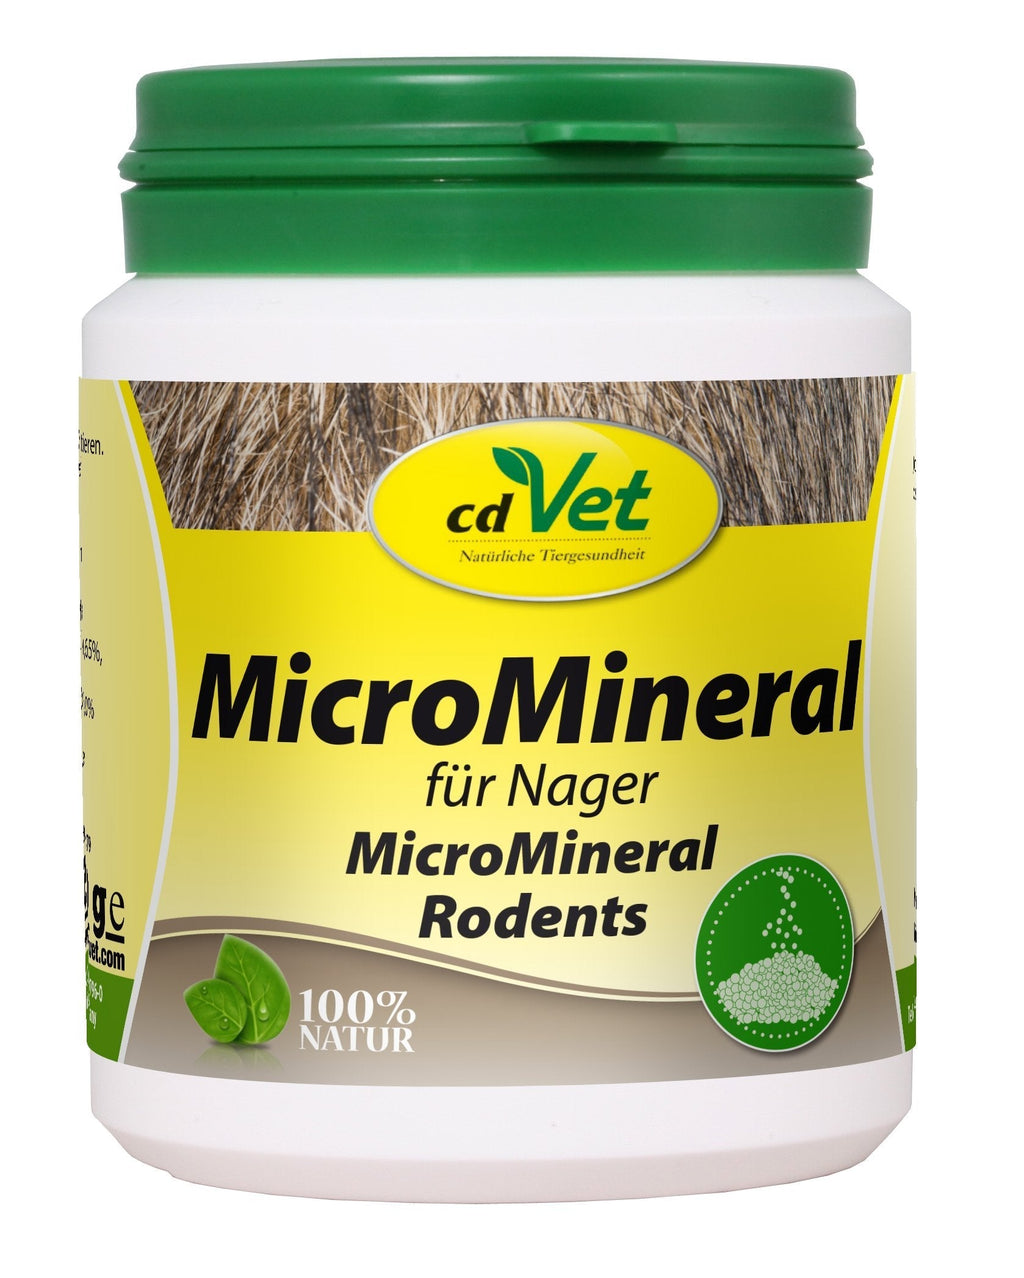 cdVet Naturprodukte MicroMineral Rodents 150 g - natural micronutrient supply - natural mineralization and vitamin coverage - relief detoxification organs - calcium - magnesium - - PawsPlanet Australia